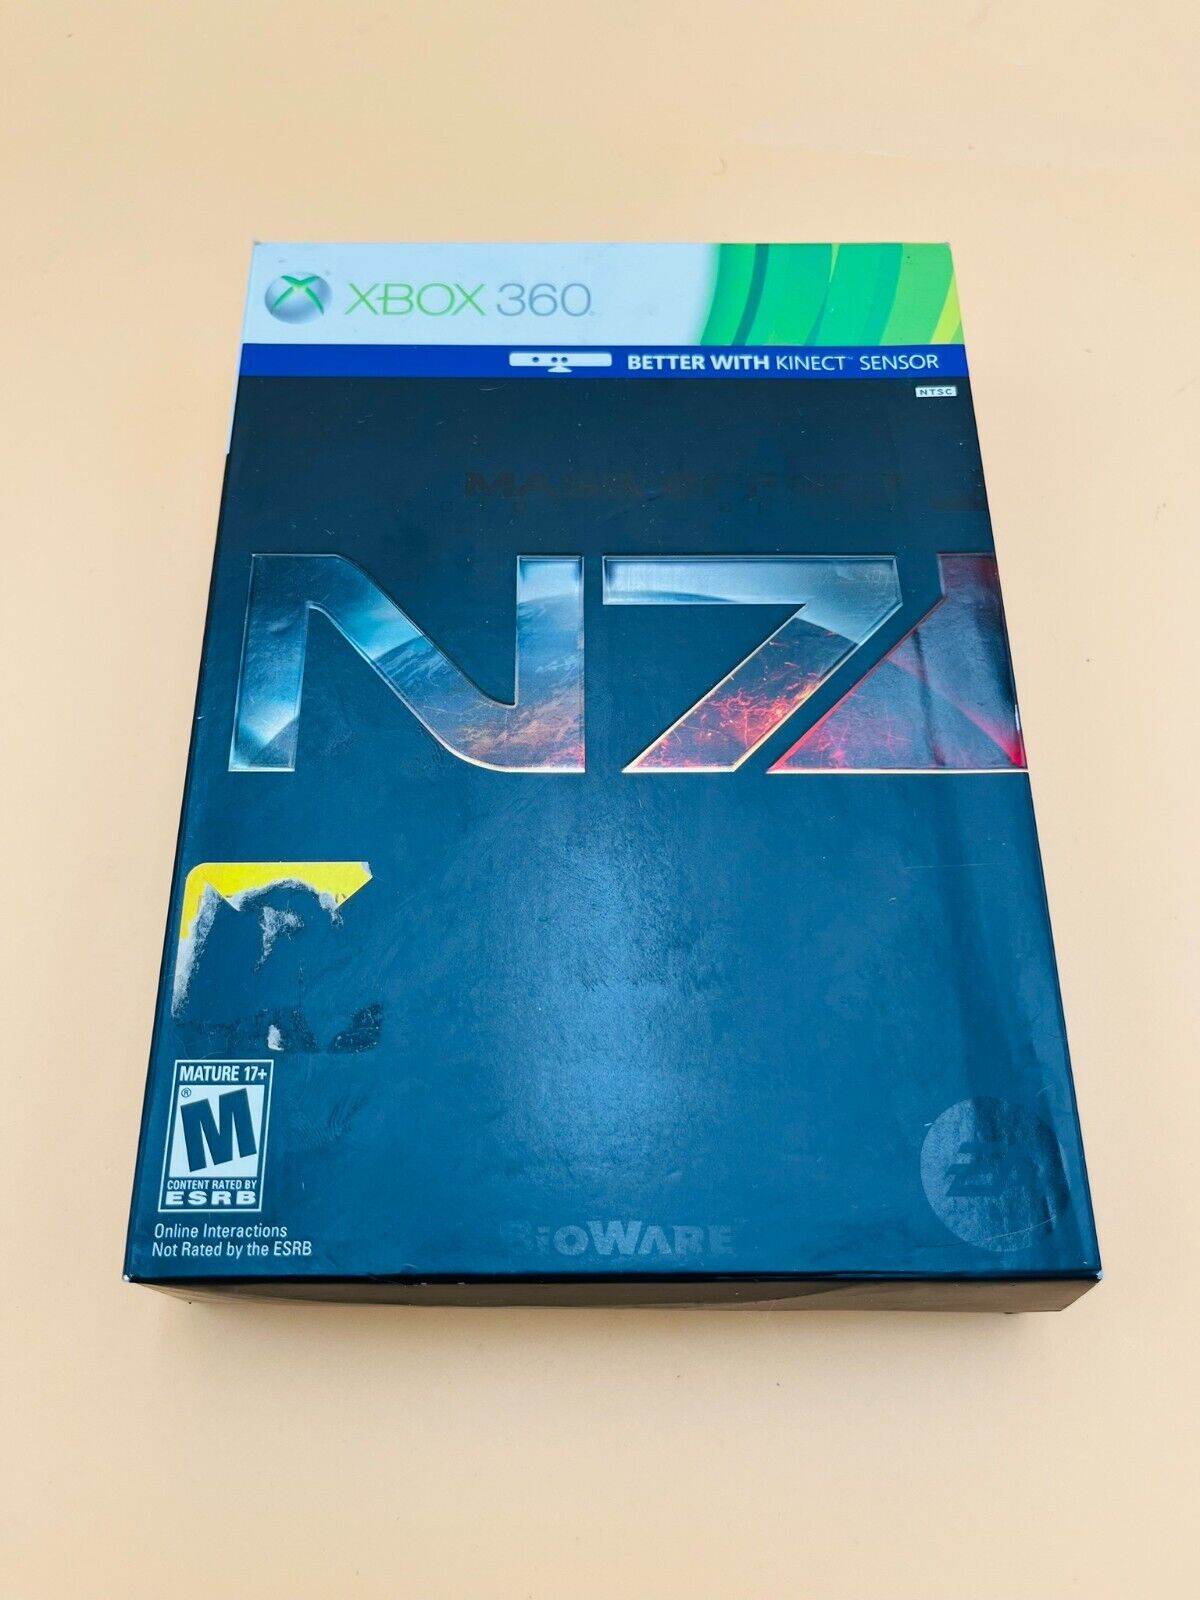 Xbox 360 - MASS EFFECT 3 - N7 Collector's Edition - Steelcase - Complete in Case